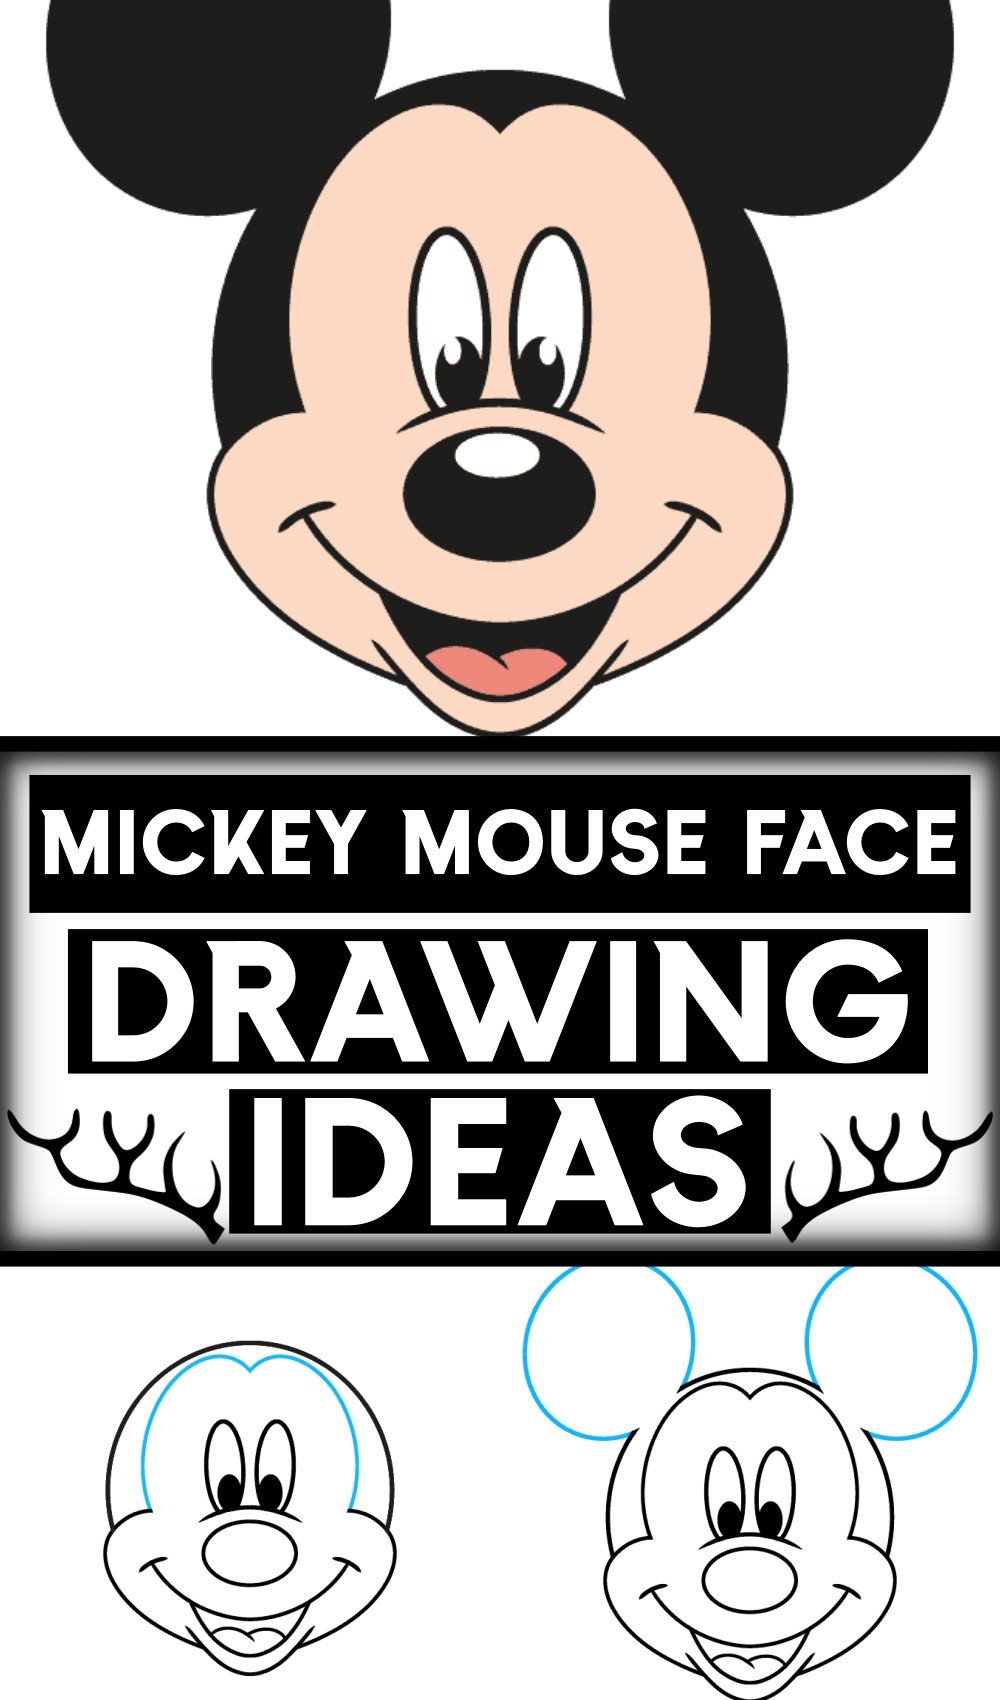 How To Draw An Easy Mickey Mouse Face